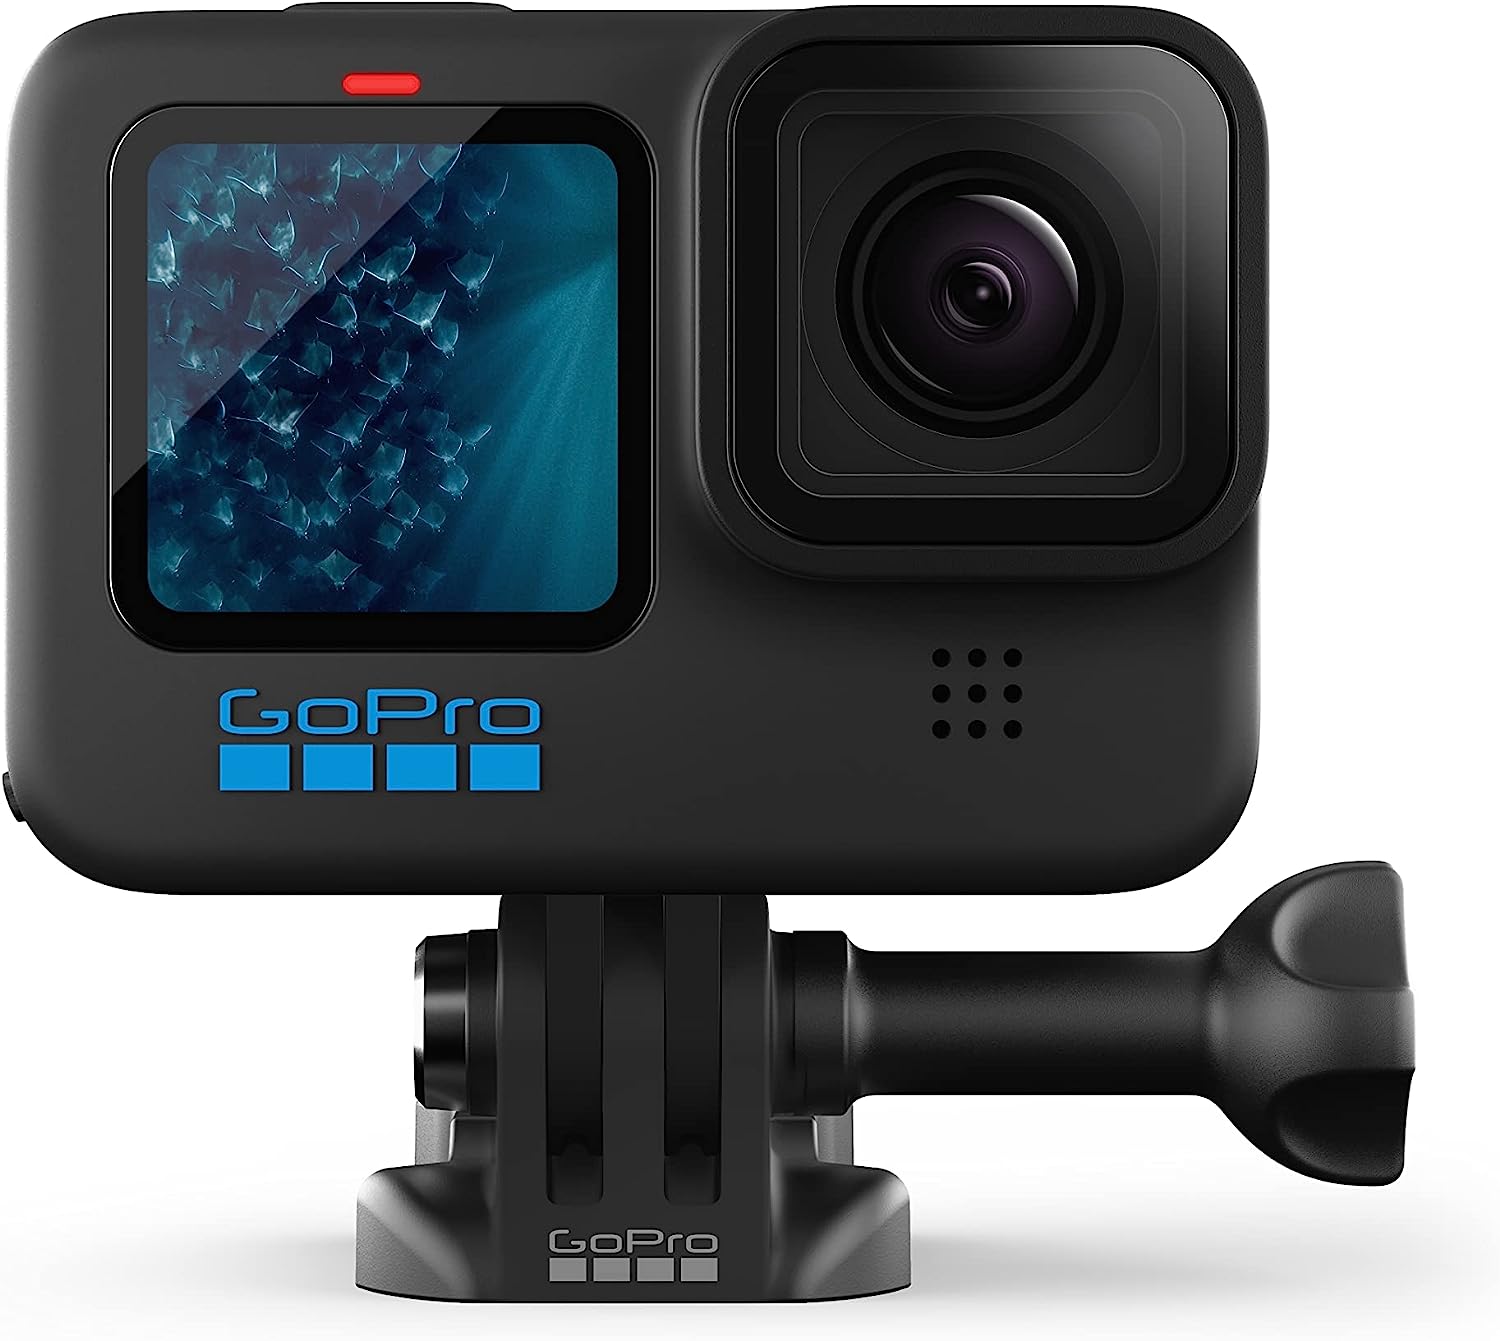 GoPro HERO 11 HyperSmooth Action Camera, 27MP with Improved Performance, 5.3K60/2.7K240 Video, Wi-Fi & Bluetooth Connectivity, 1720mAh Capacity Rechargeable Battery, Black